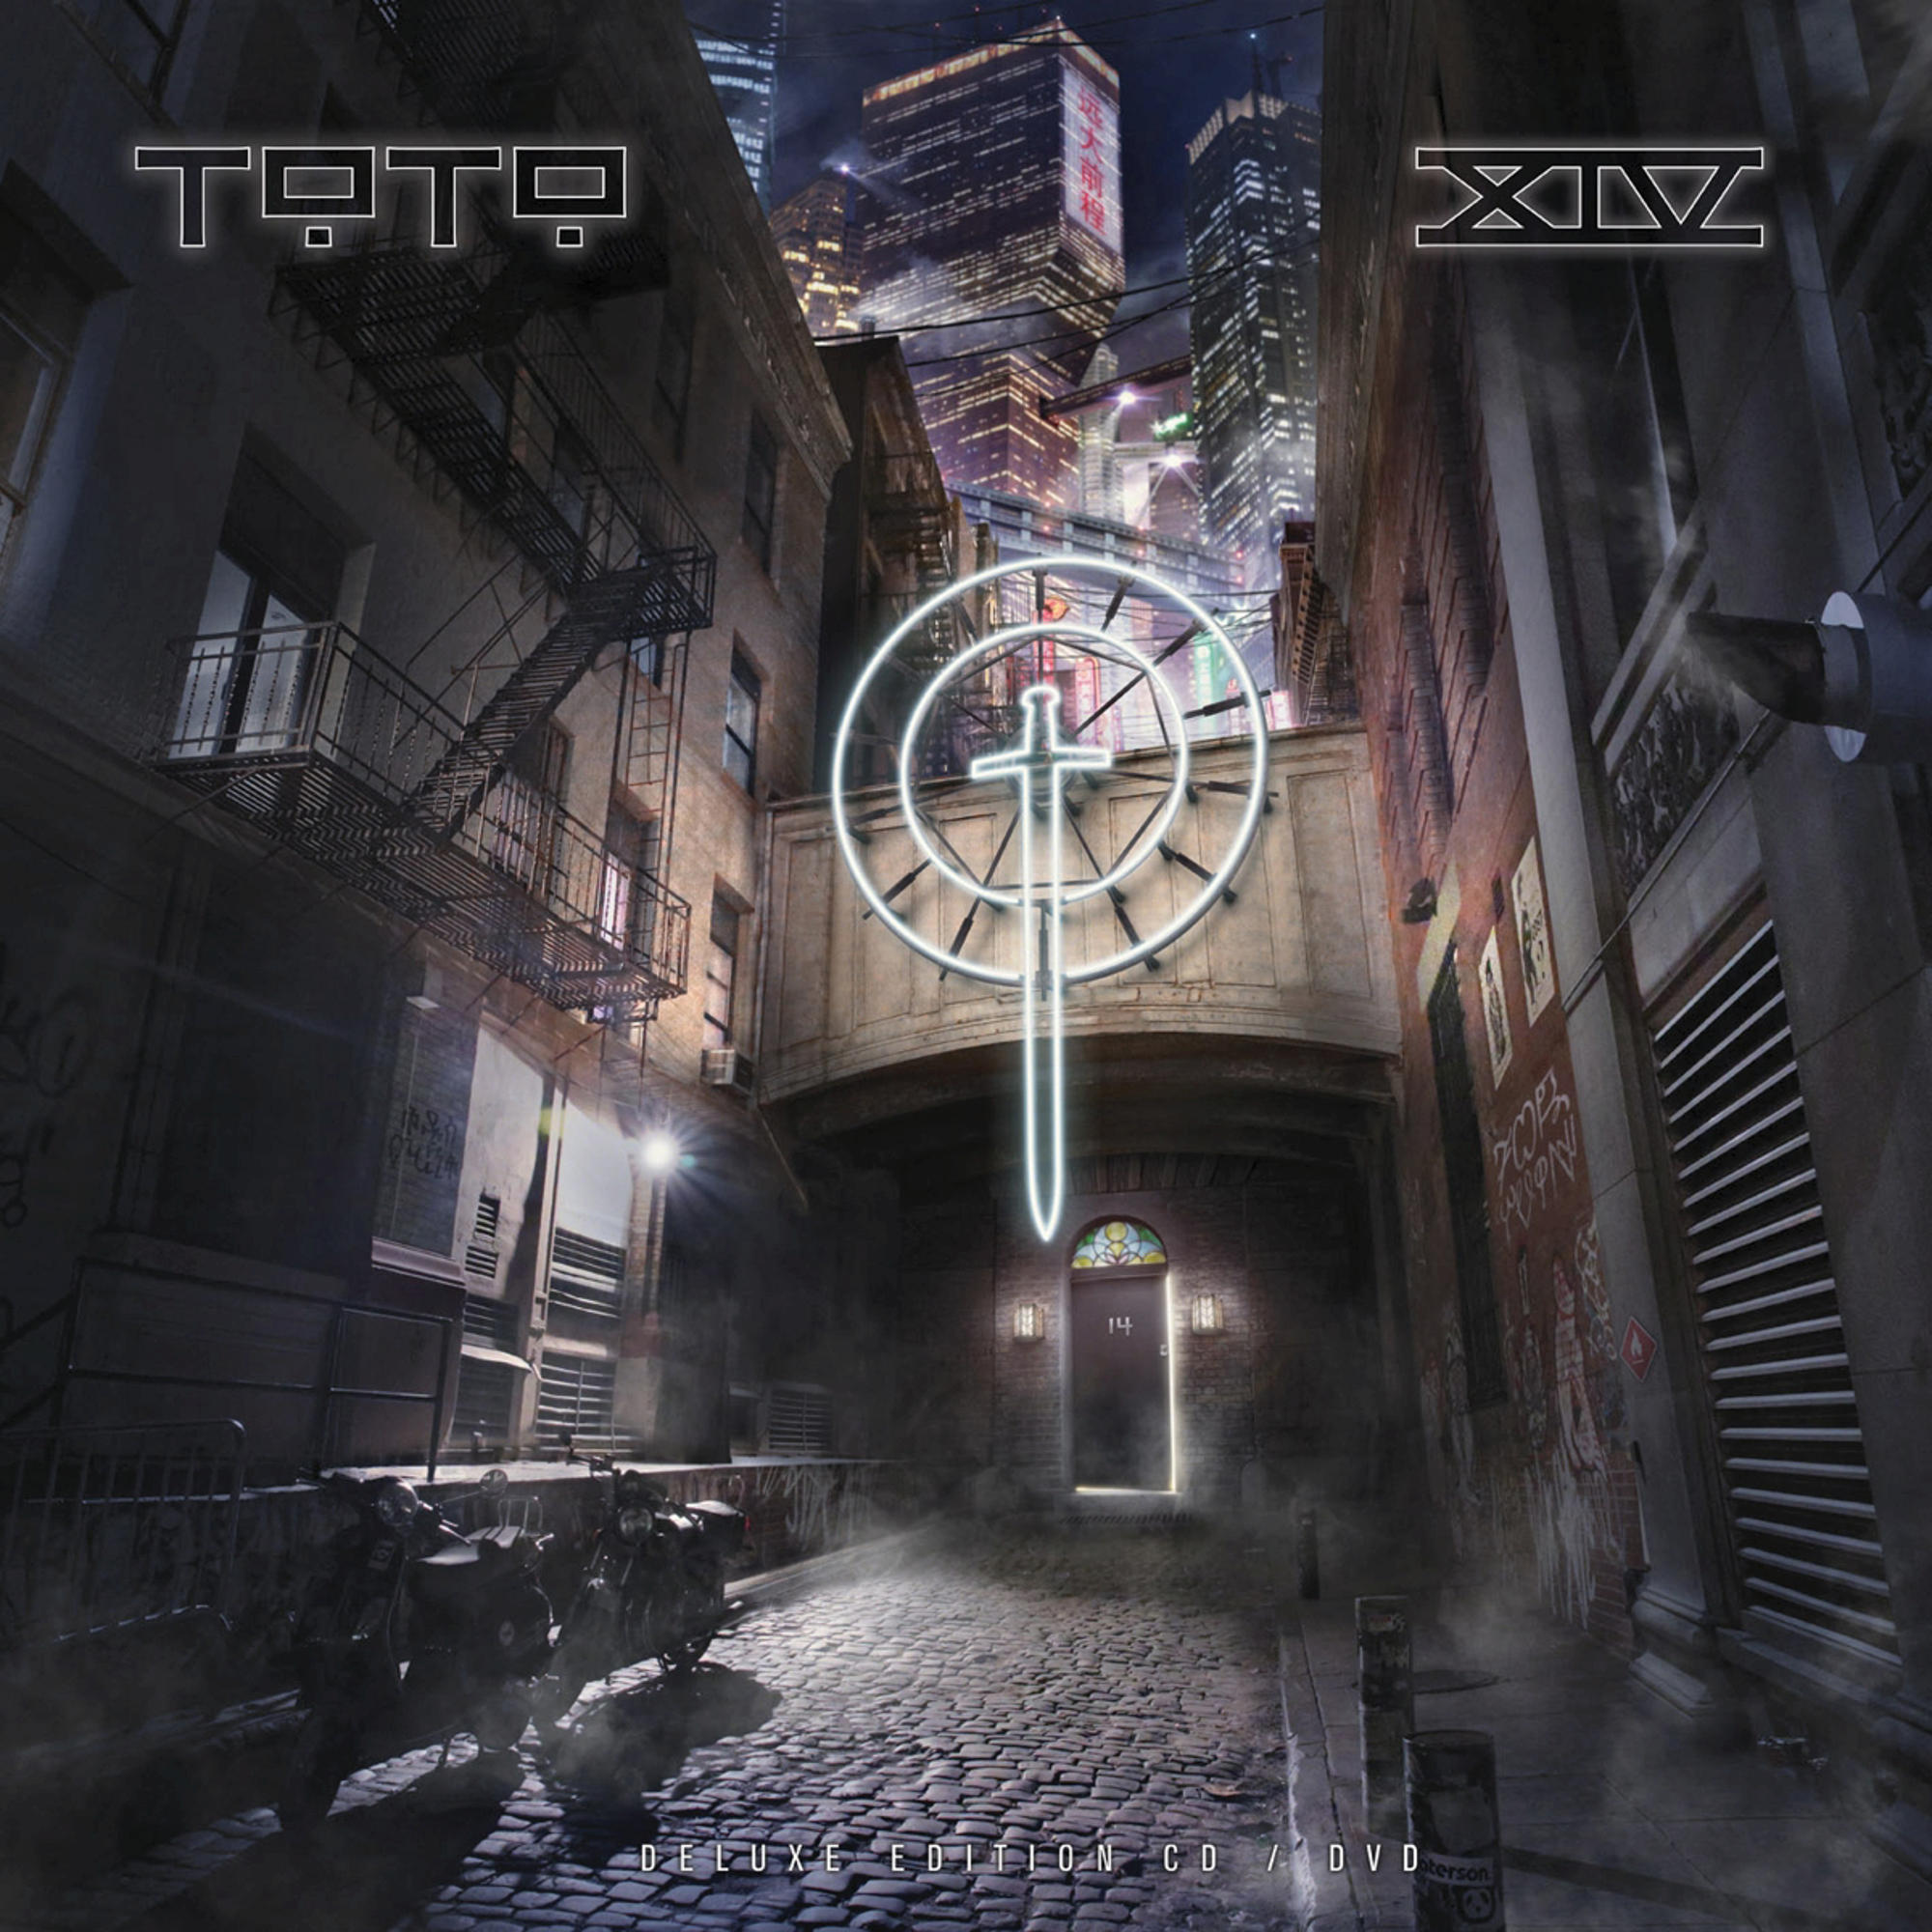 Toto - Toto XIV DVD (Limited - Edition) Video) Ecolbook + (CD